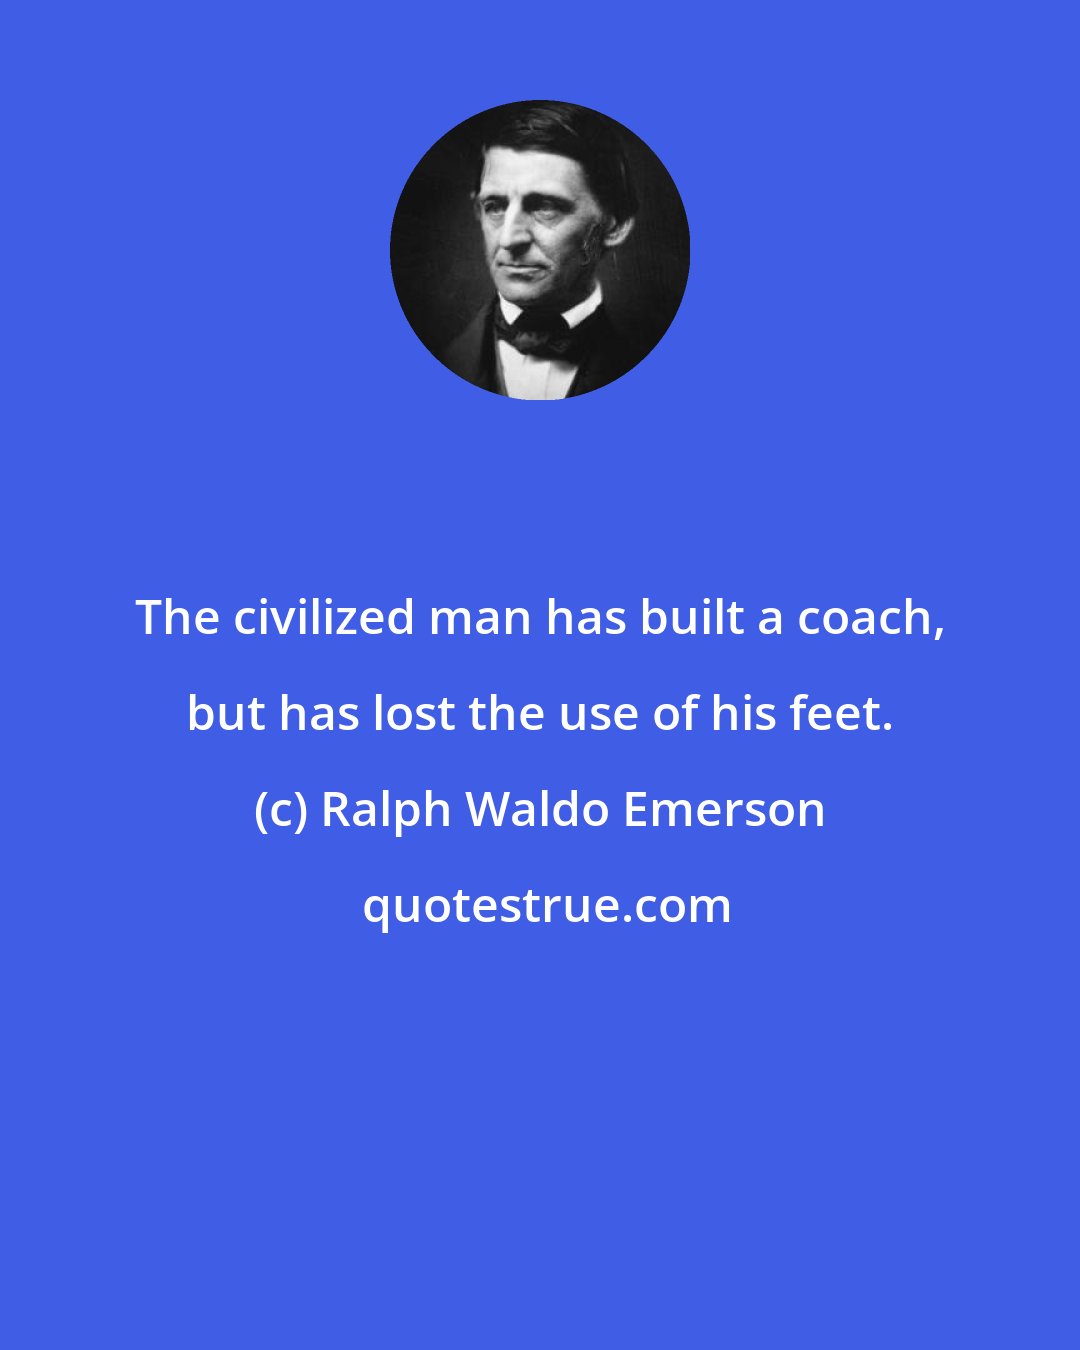 Ralph Waldo Emerson: The civilized man has built a coach, but has lost the use of his feet.